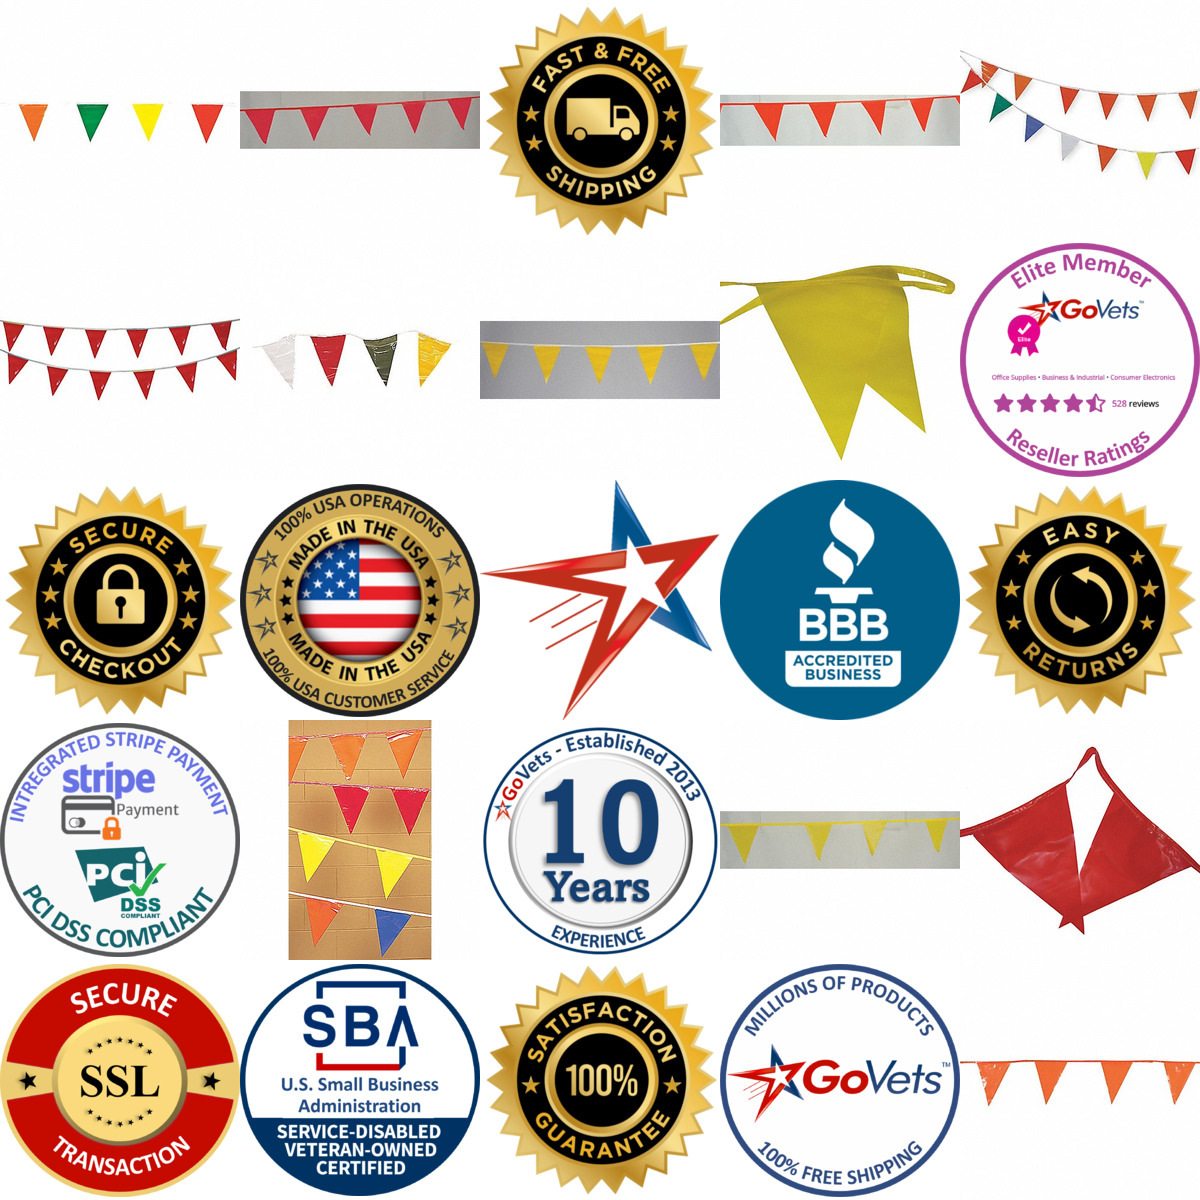 A selection of Pennants products on GoVets